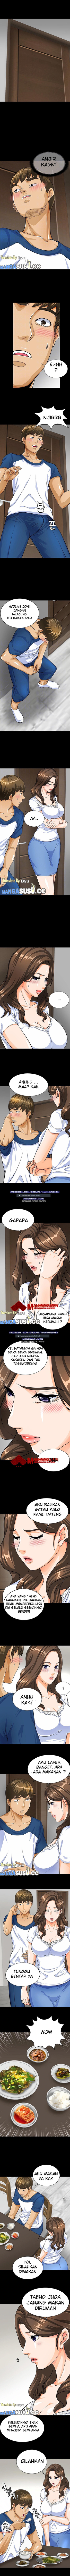 Baca I Live With Sister-in-Law Chapter 2  - GudangKomik